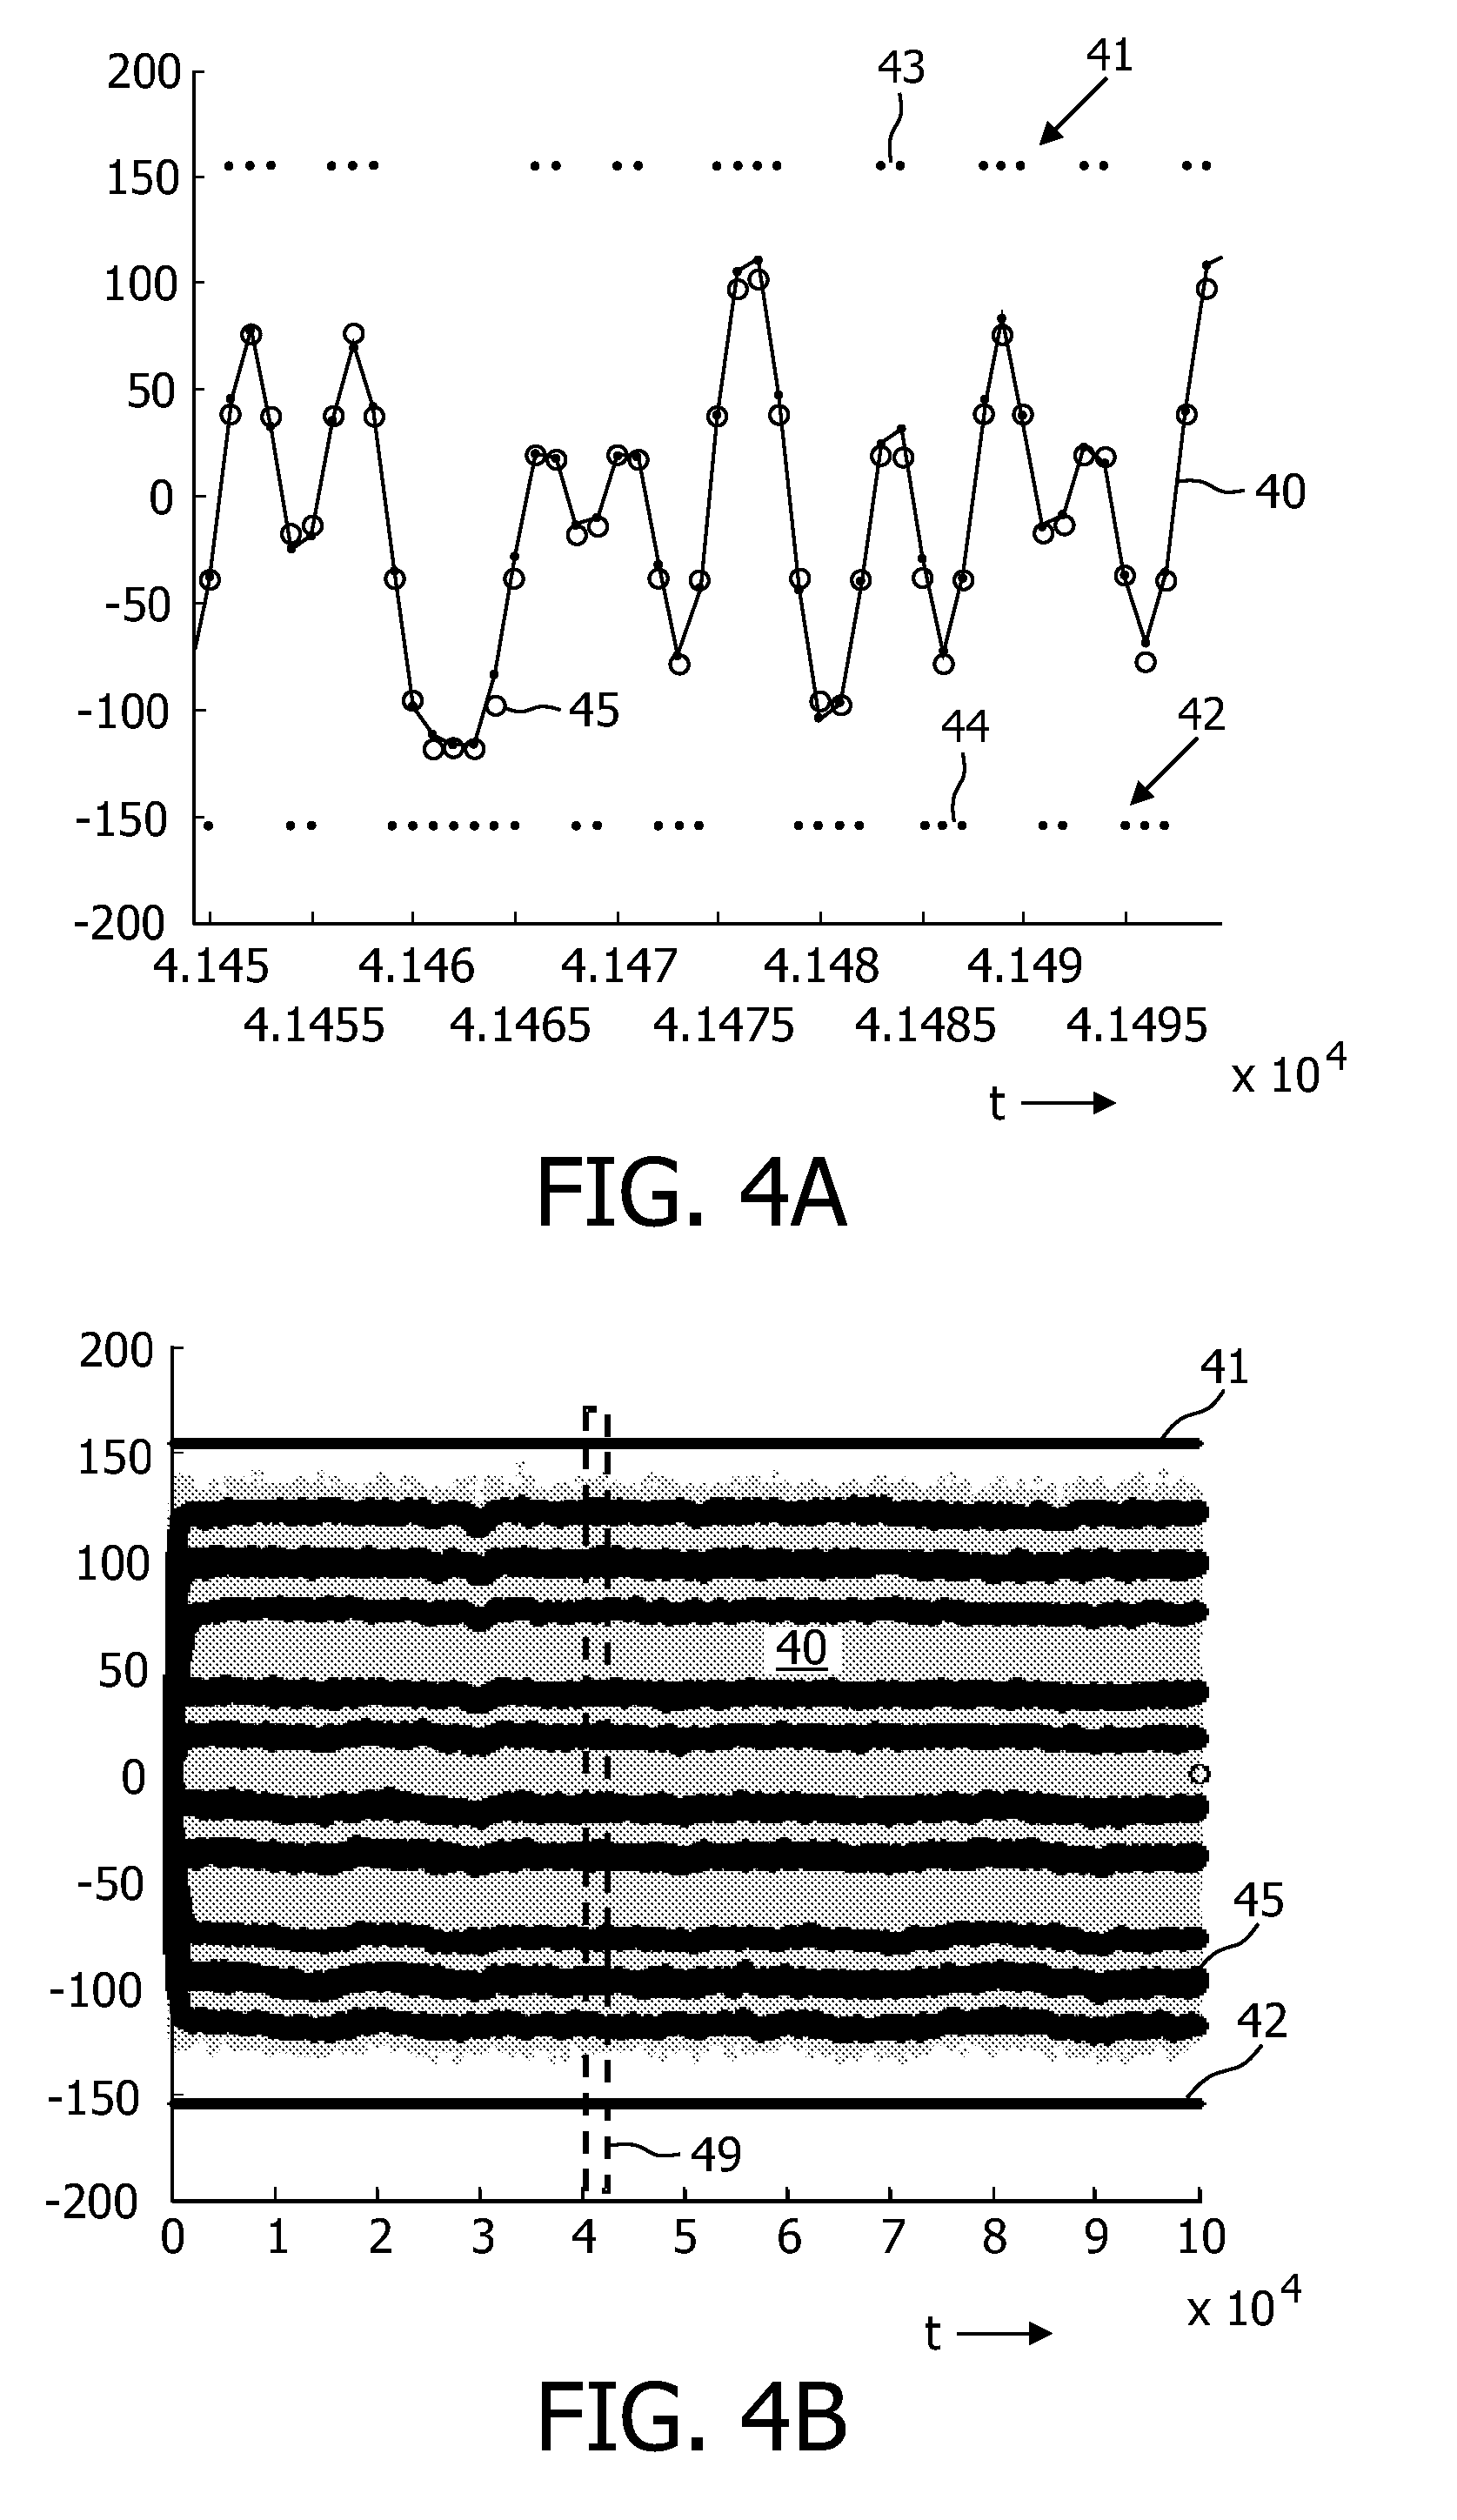 Apparatus and Method For Reference Level Based Write Strategy Optimization